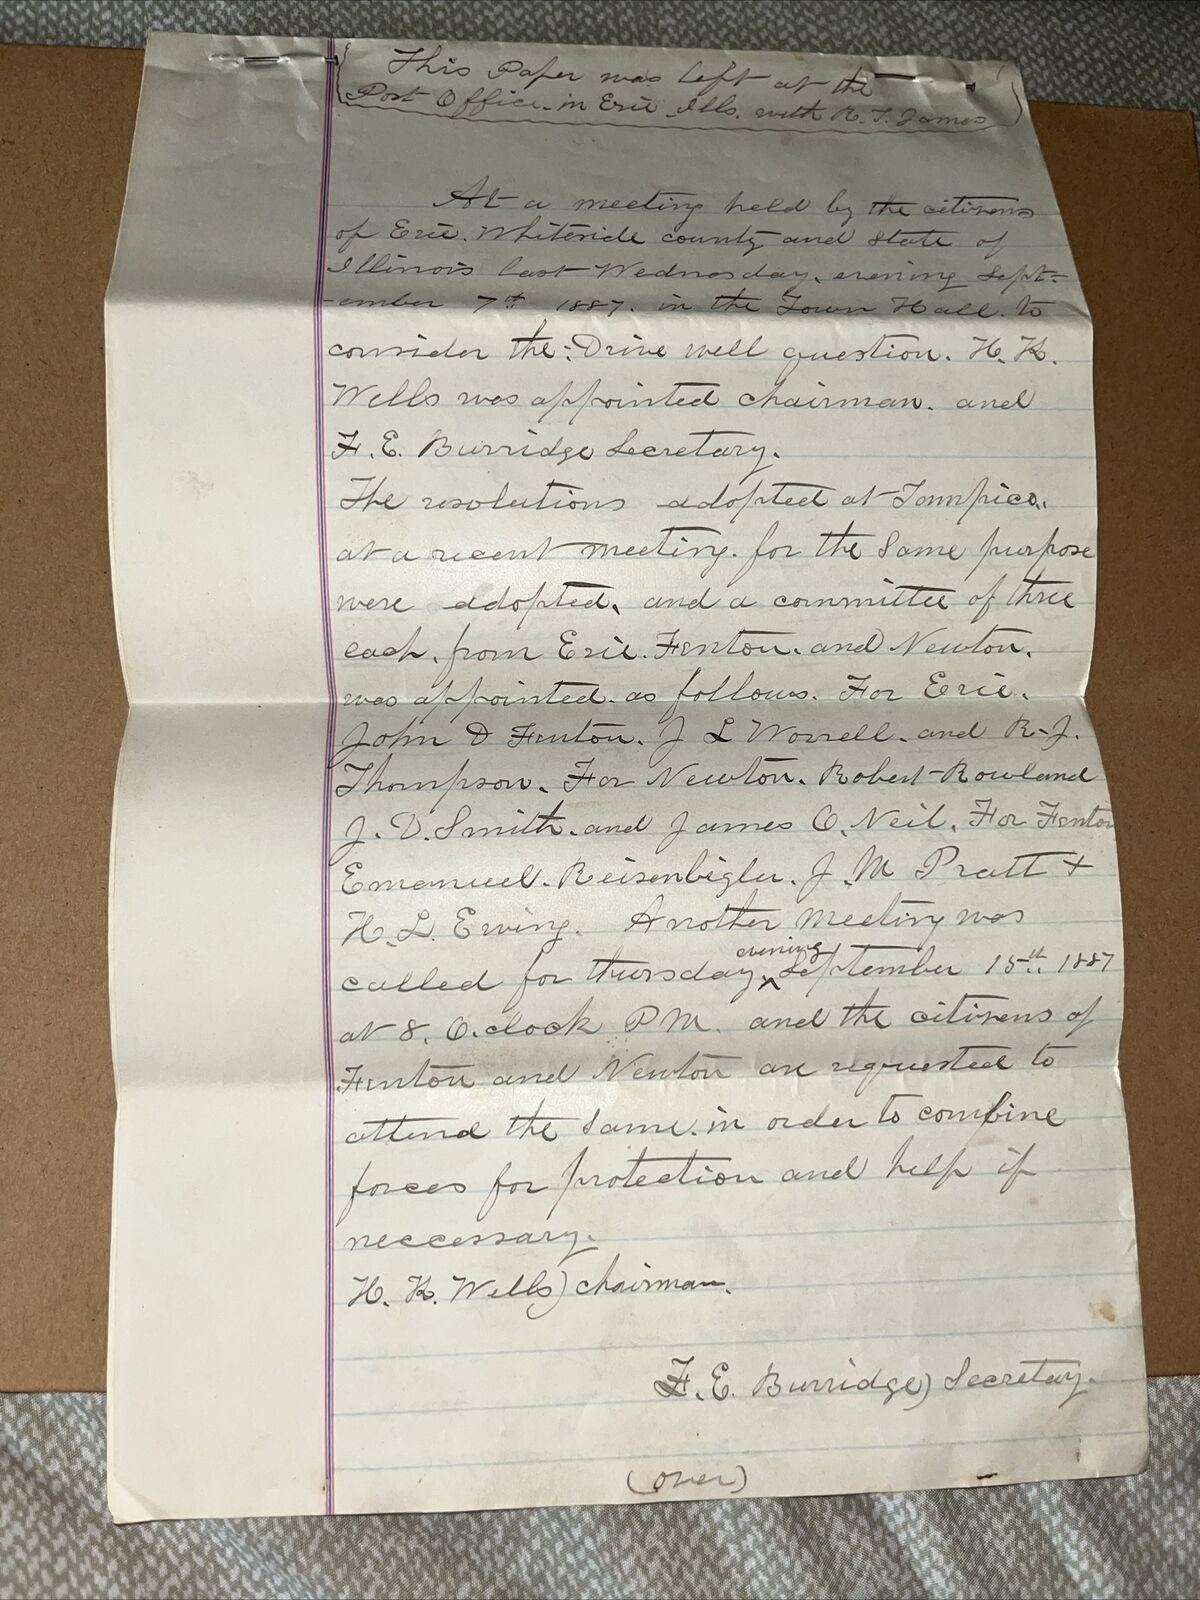 Antique Minutes From Whiteside County Illinois Citizens Meetings on Driven Wells